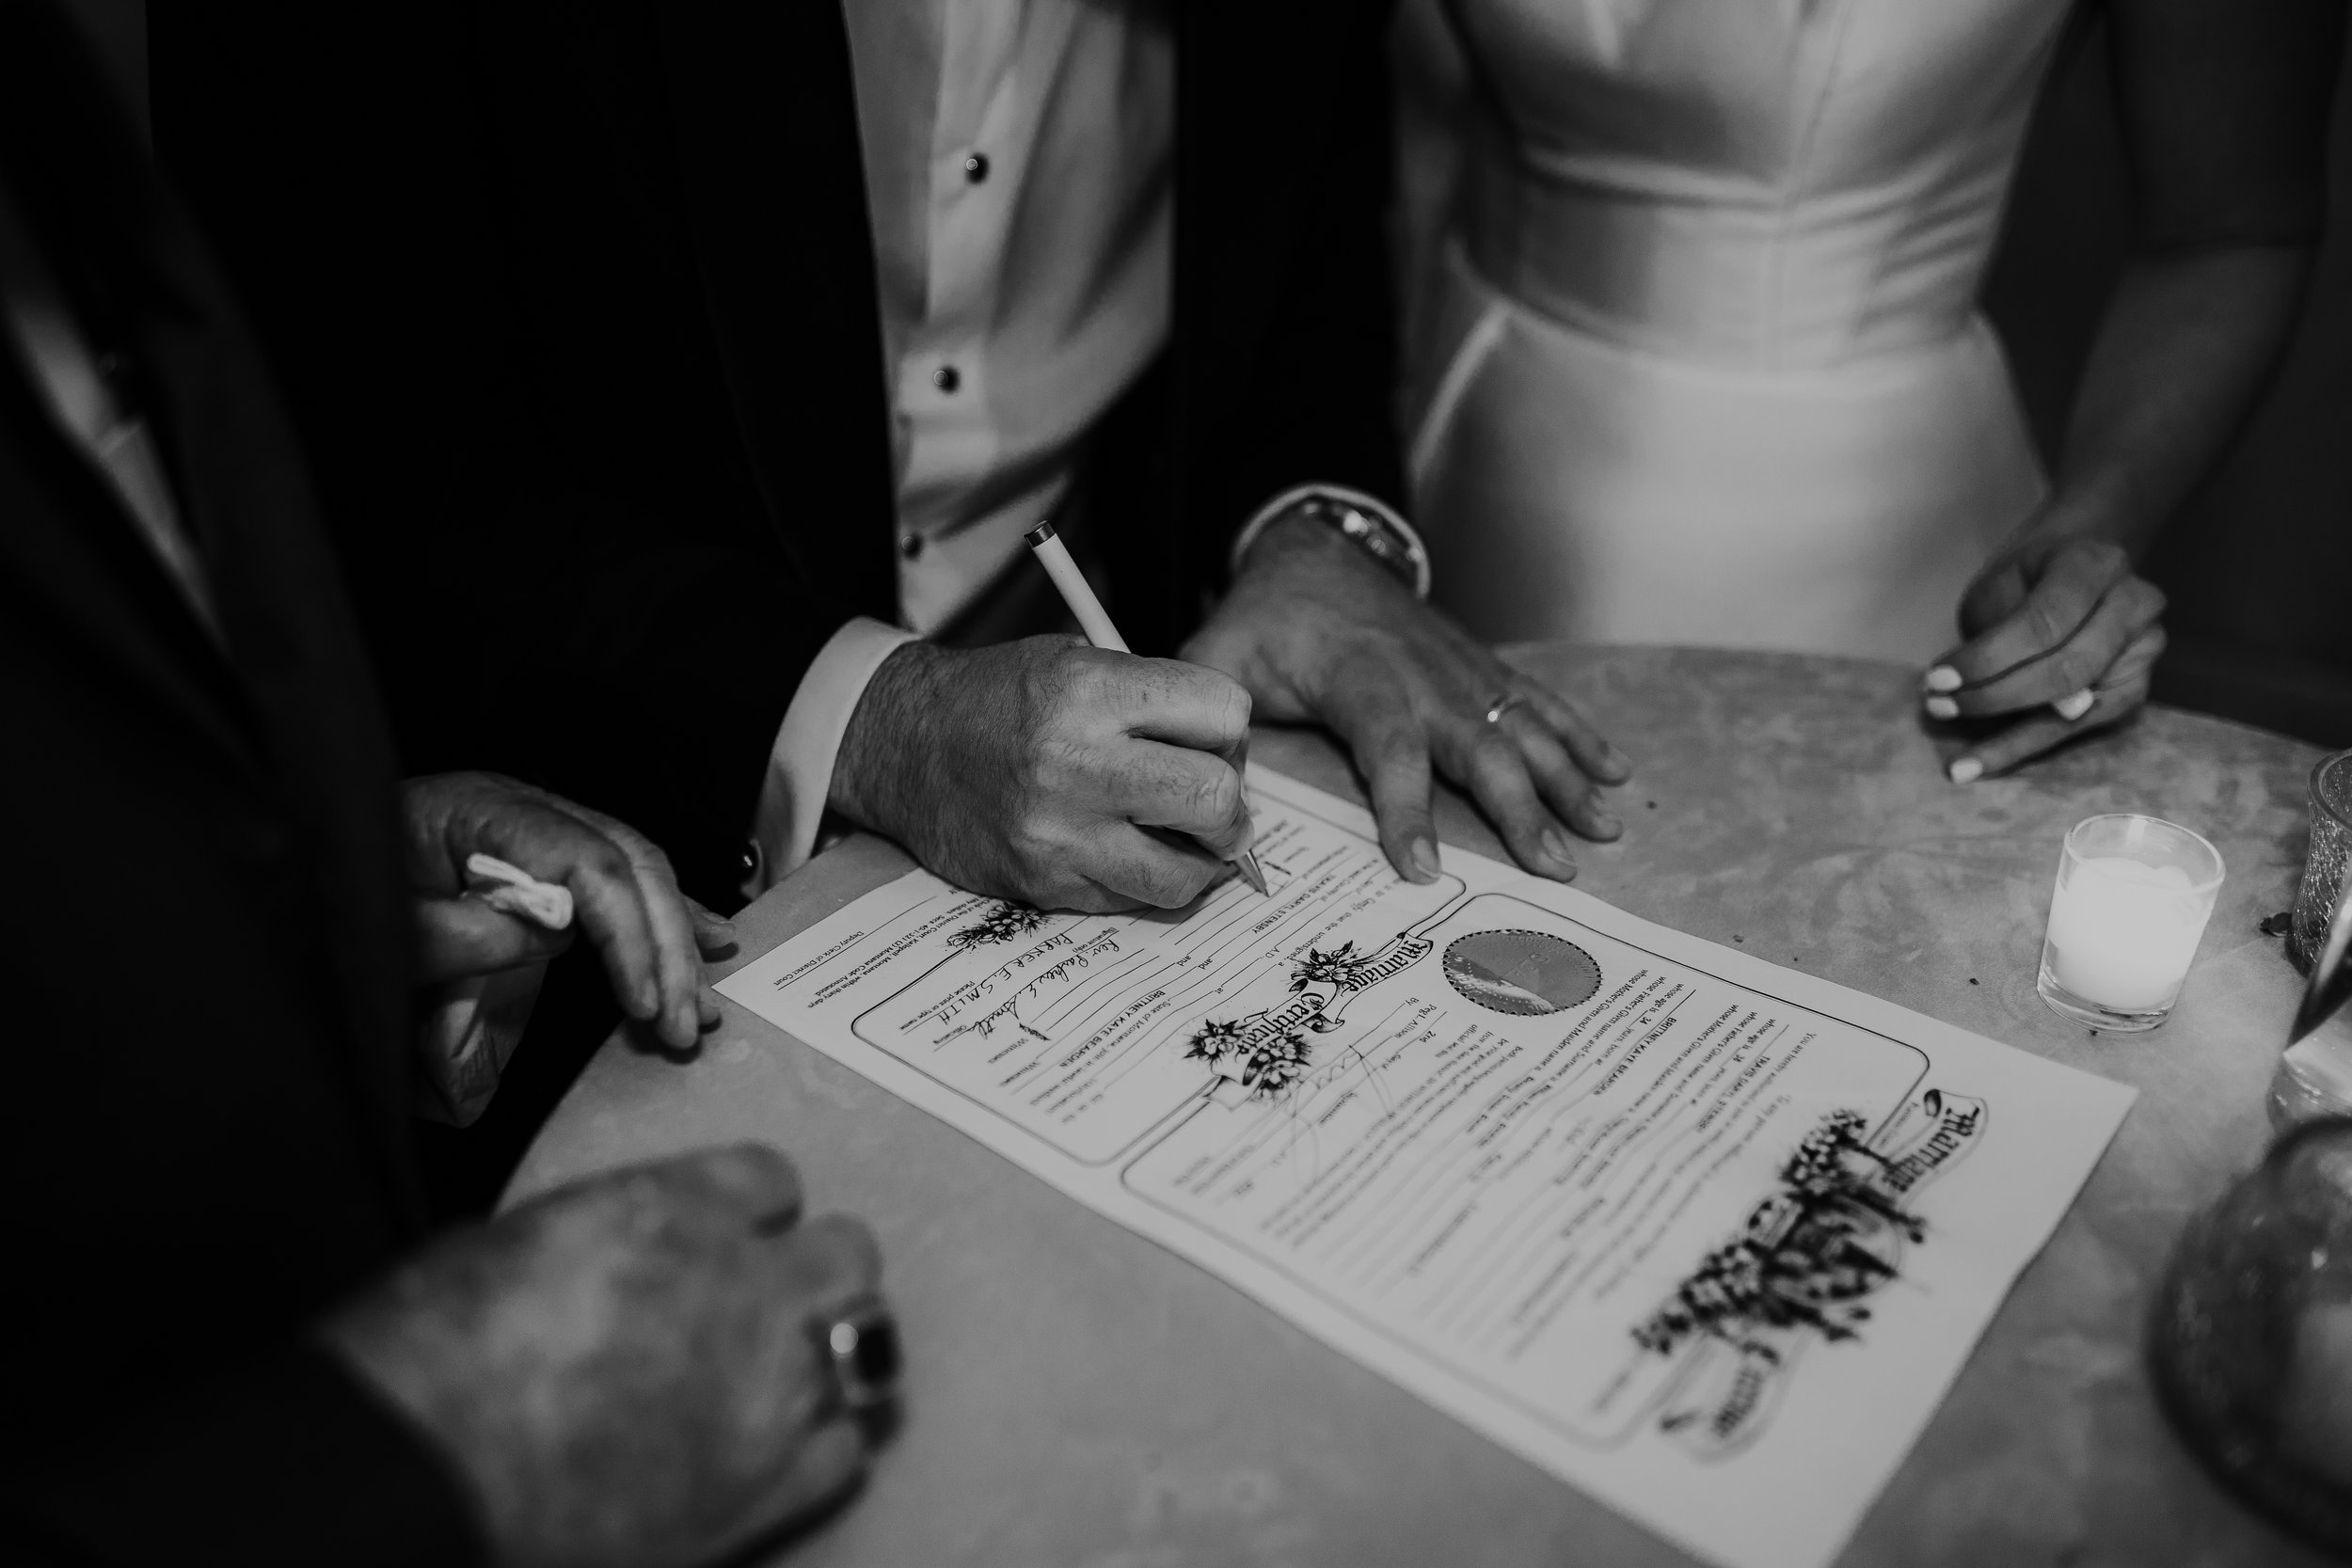  Bride and groom signing wedding certificate. Wedding inspo. Bride is wearing gorgeous large white earrings with a strappy wedding dress and veil and groom is wearing a black suit and bowtie. #montanawedding #emilyjenkinsphoto #weddingphotos #summerw